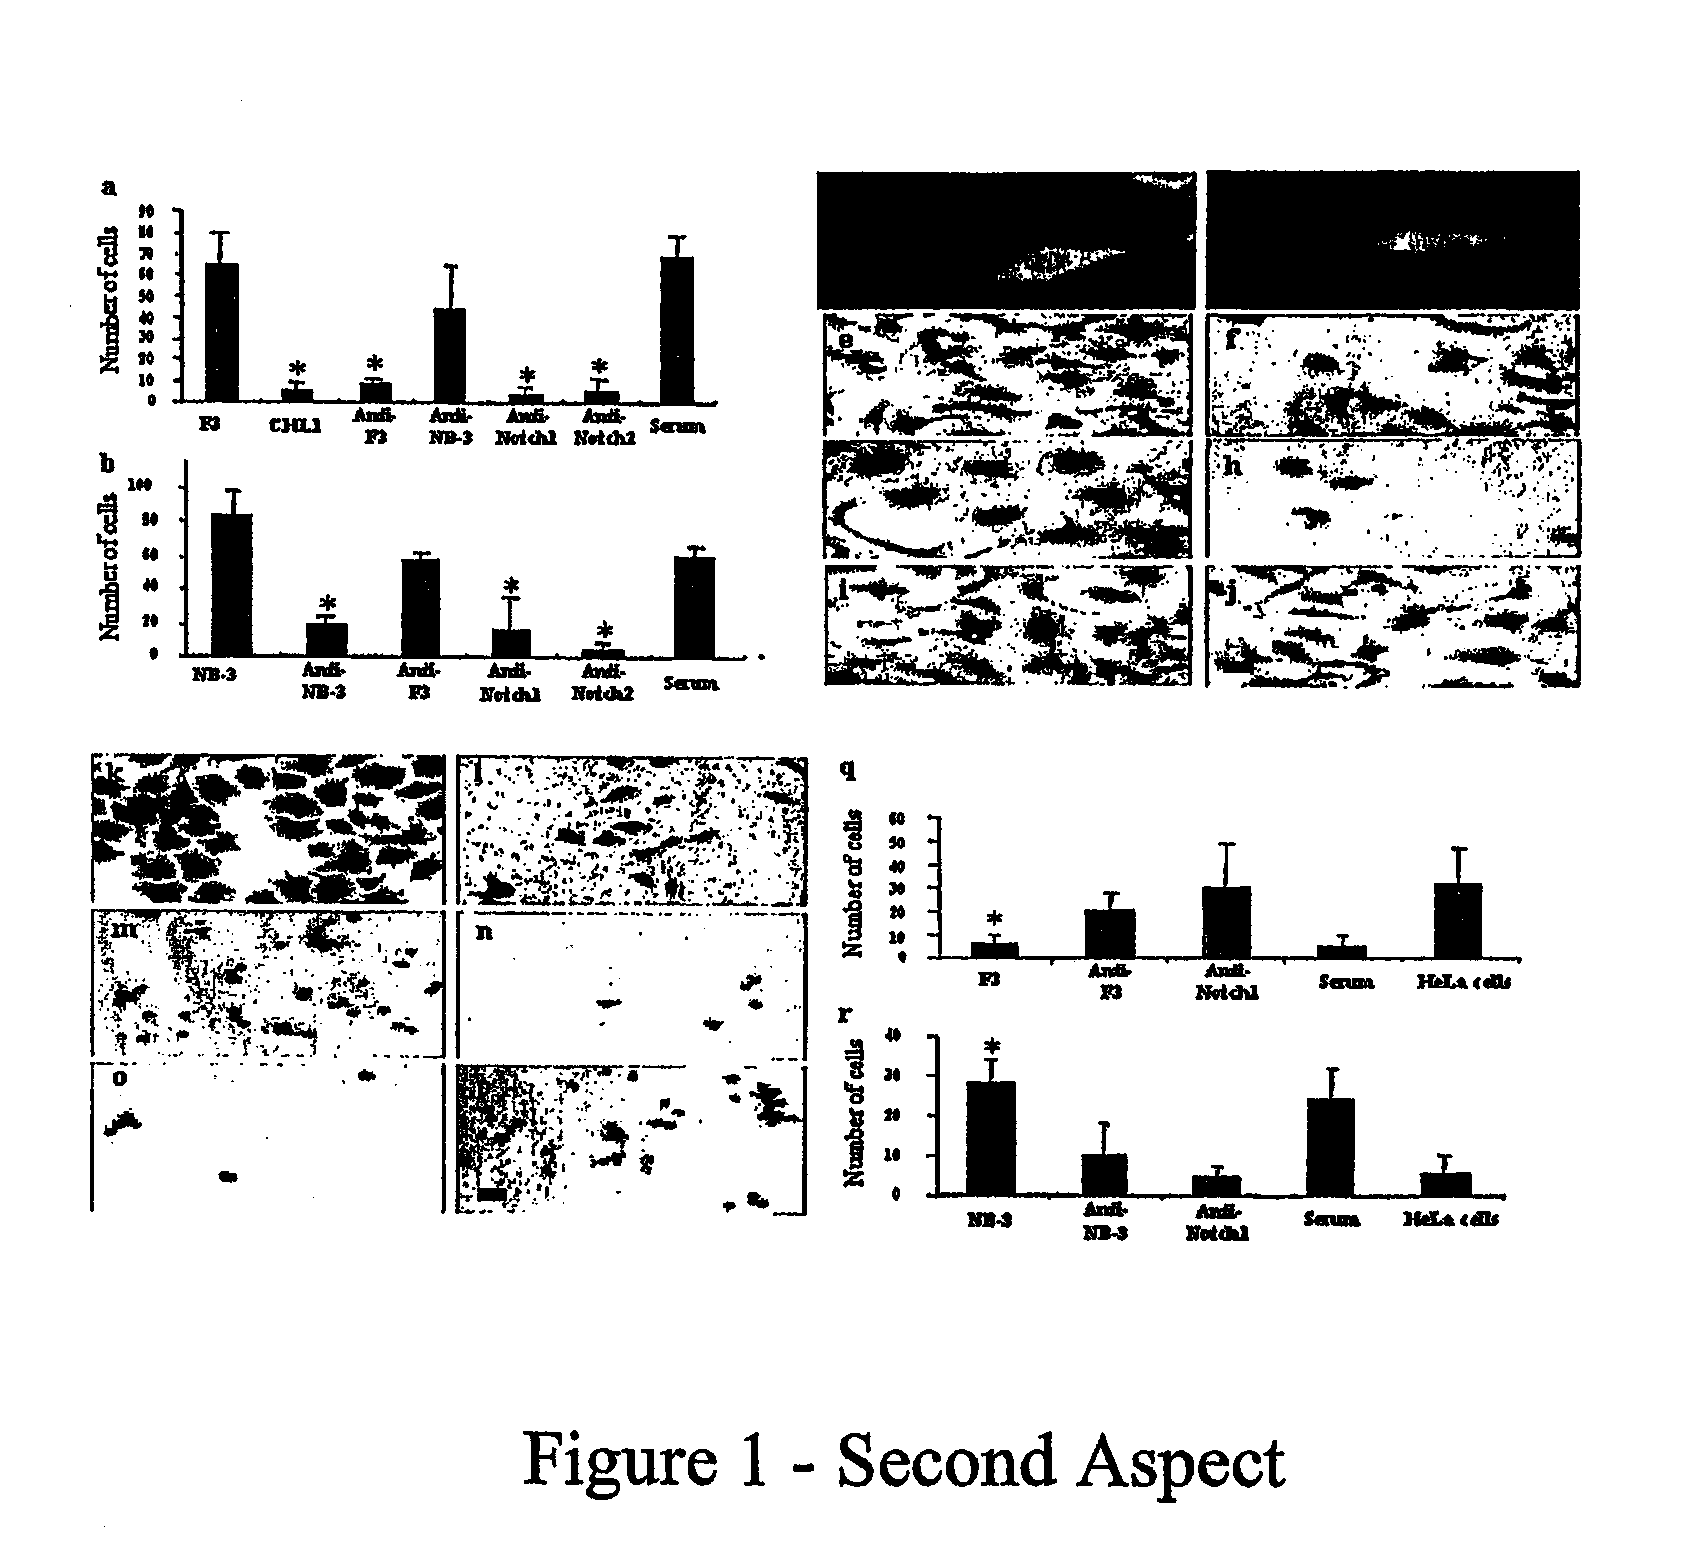 Materials and methods relating to treatment of injury and disease to the central nervous system